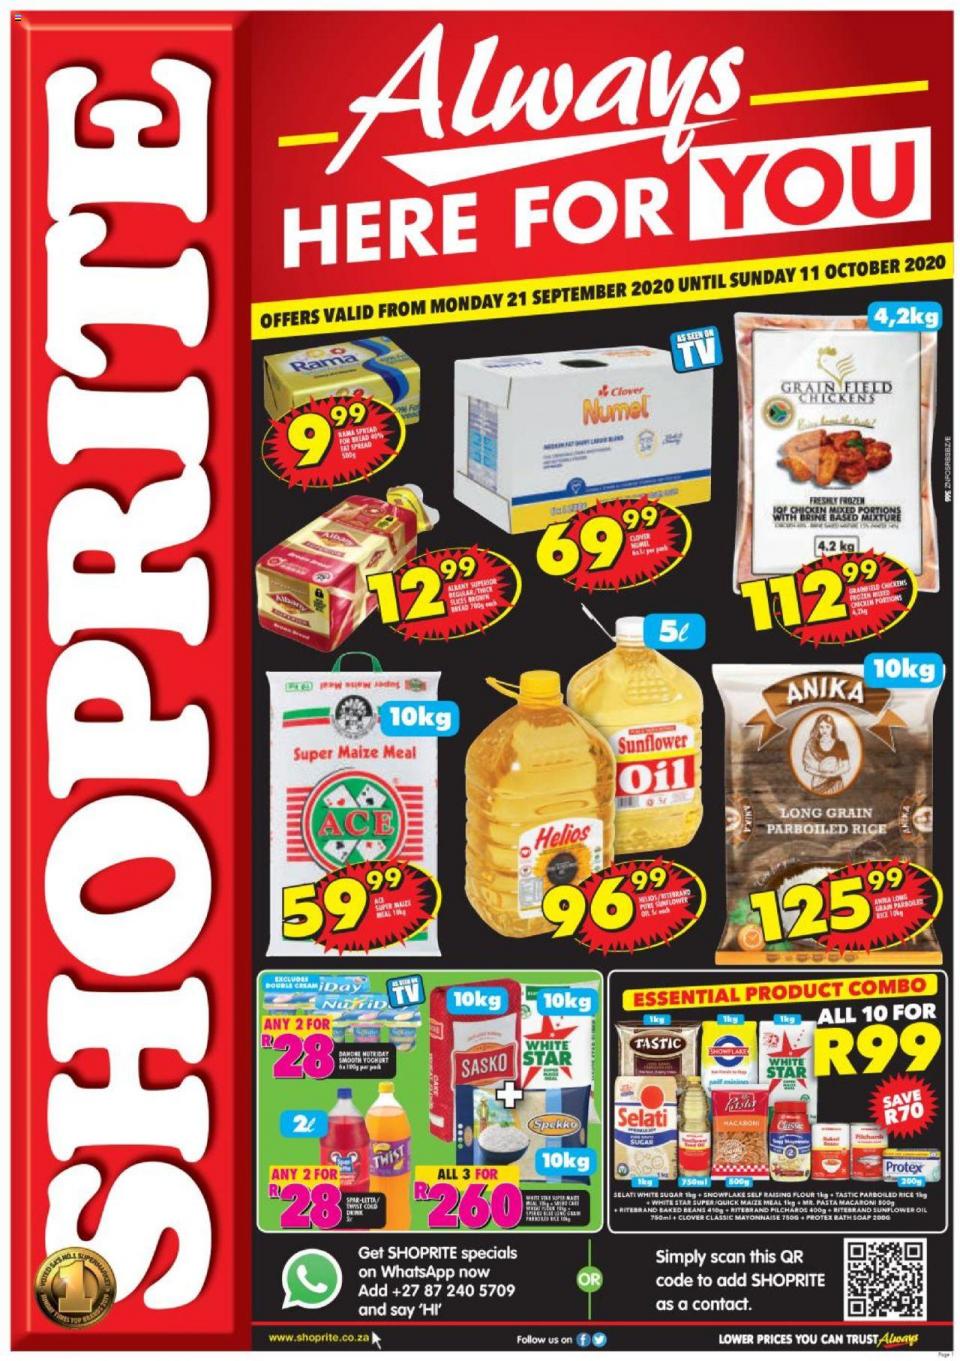 Shoprite Specials Always Here For You 21 September 2020